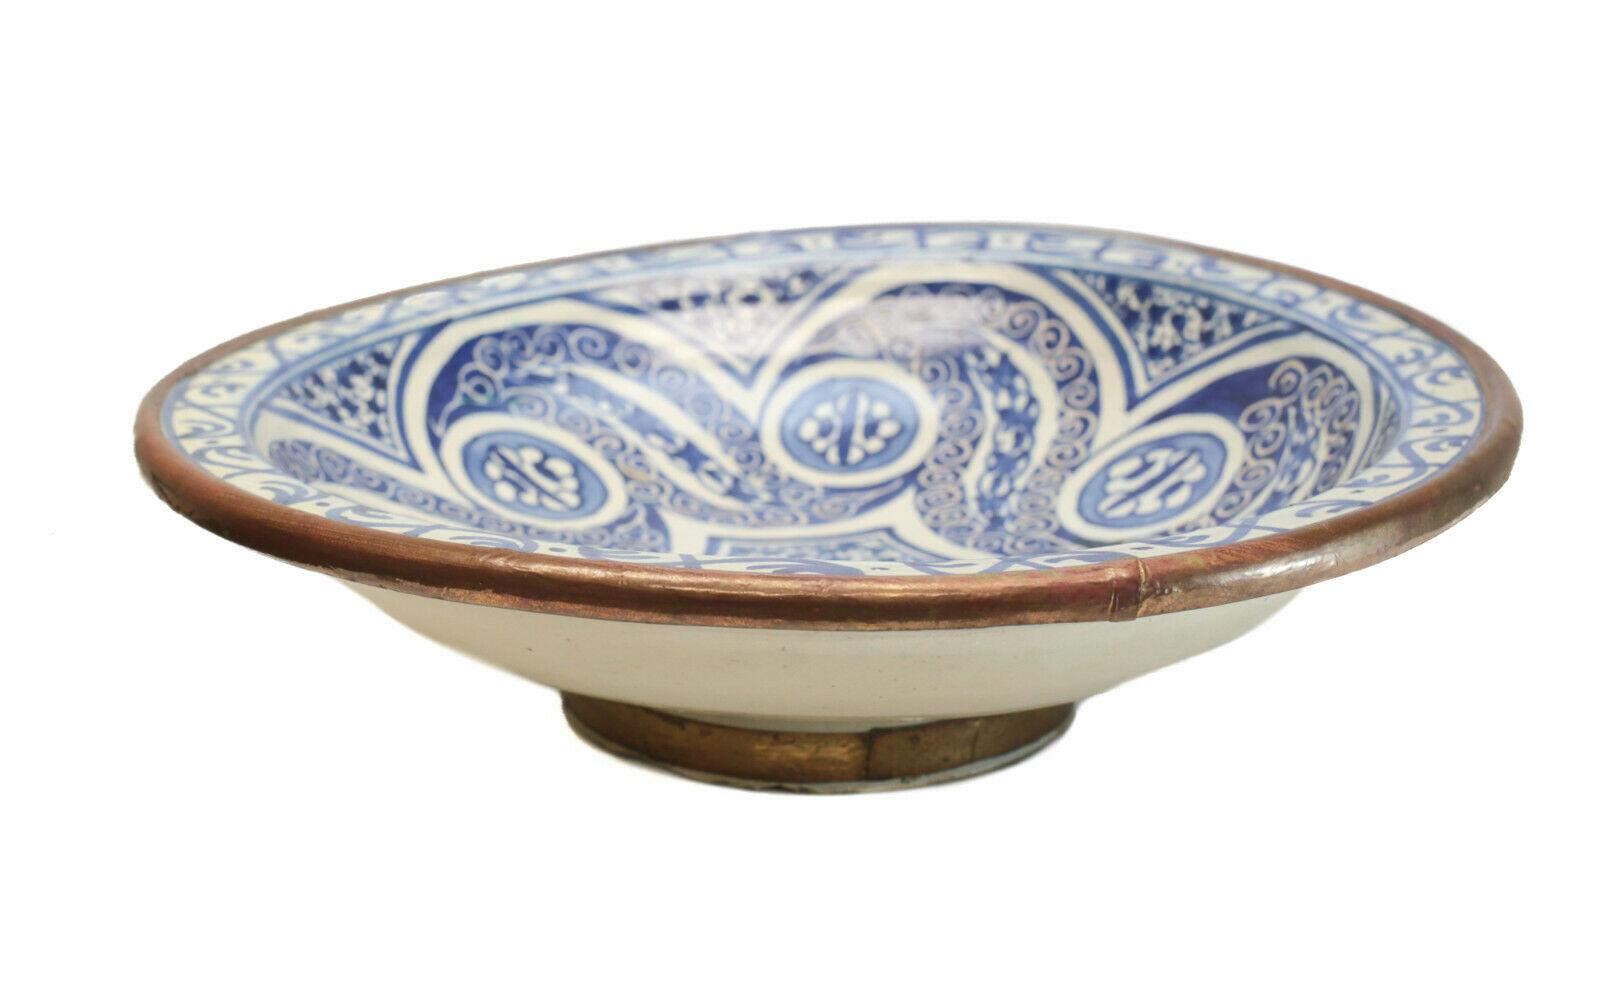 Large Hispano Moresque pottery centerpiece bowl, 19th century or earlier

Blue swirls throughout the center of the bowl.

Additional information:
Age: 19th Century or Earlier 
Type: Bowls
Dimension: 14.75 inches diameter x 3.5 inches